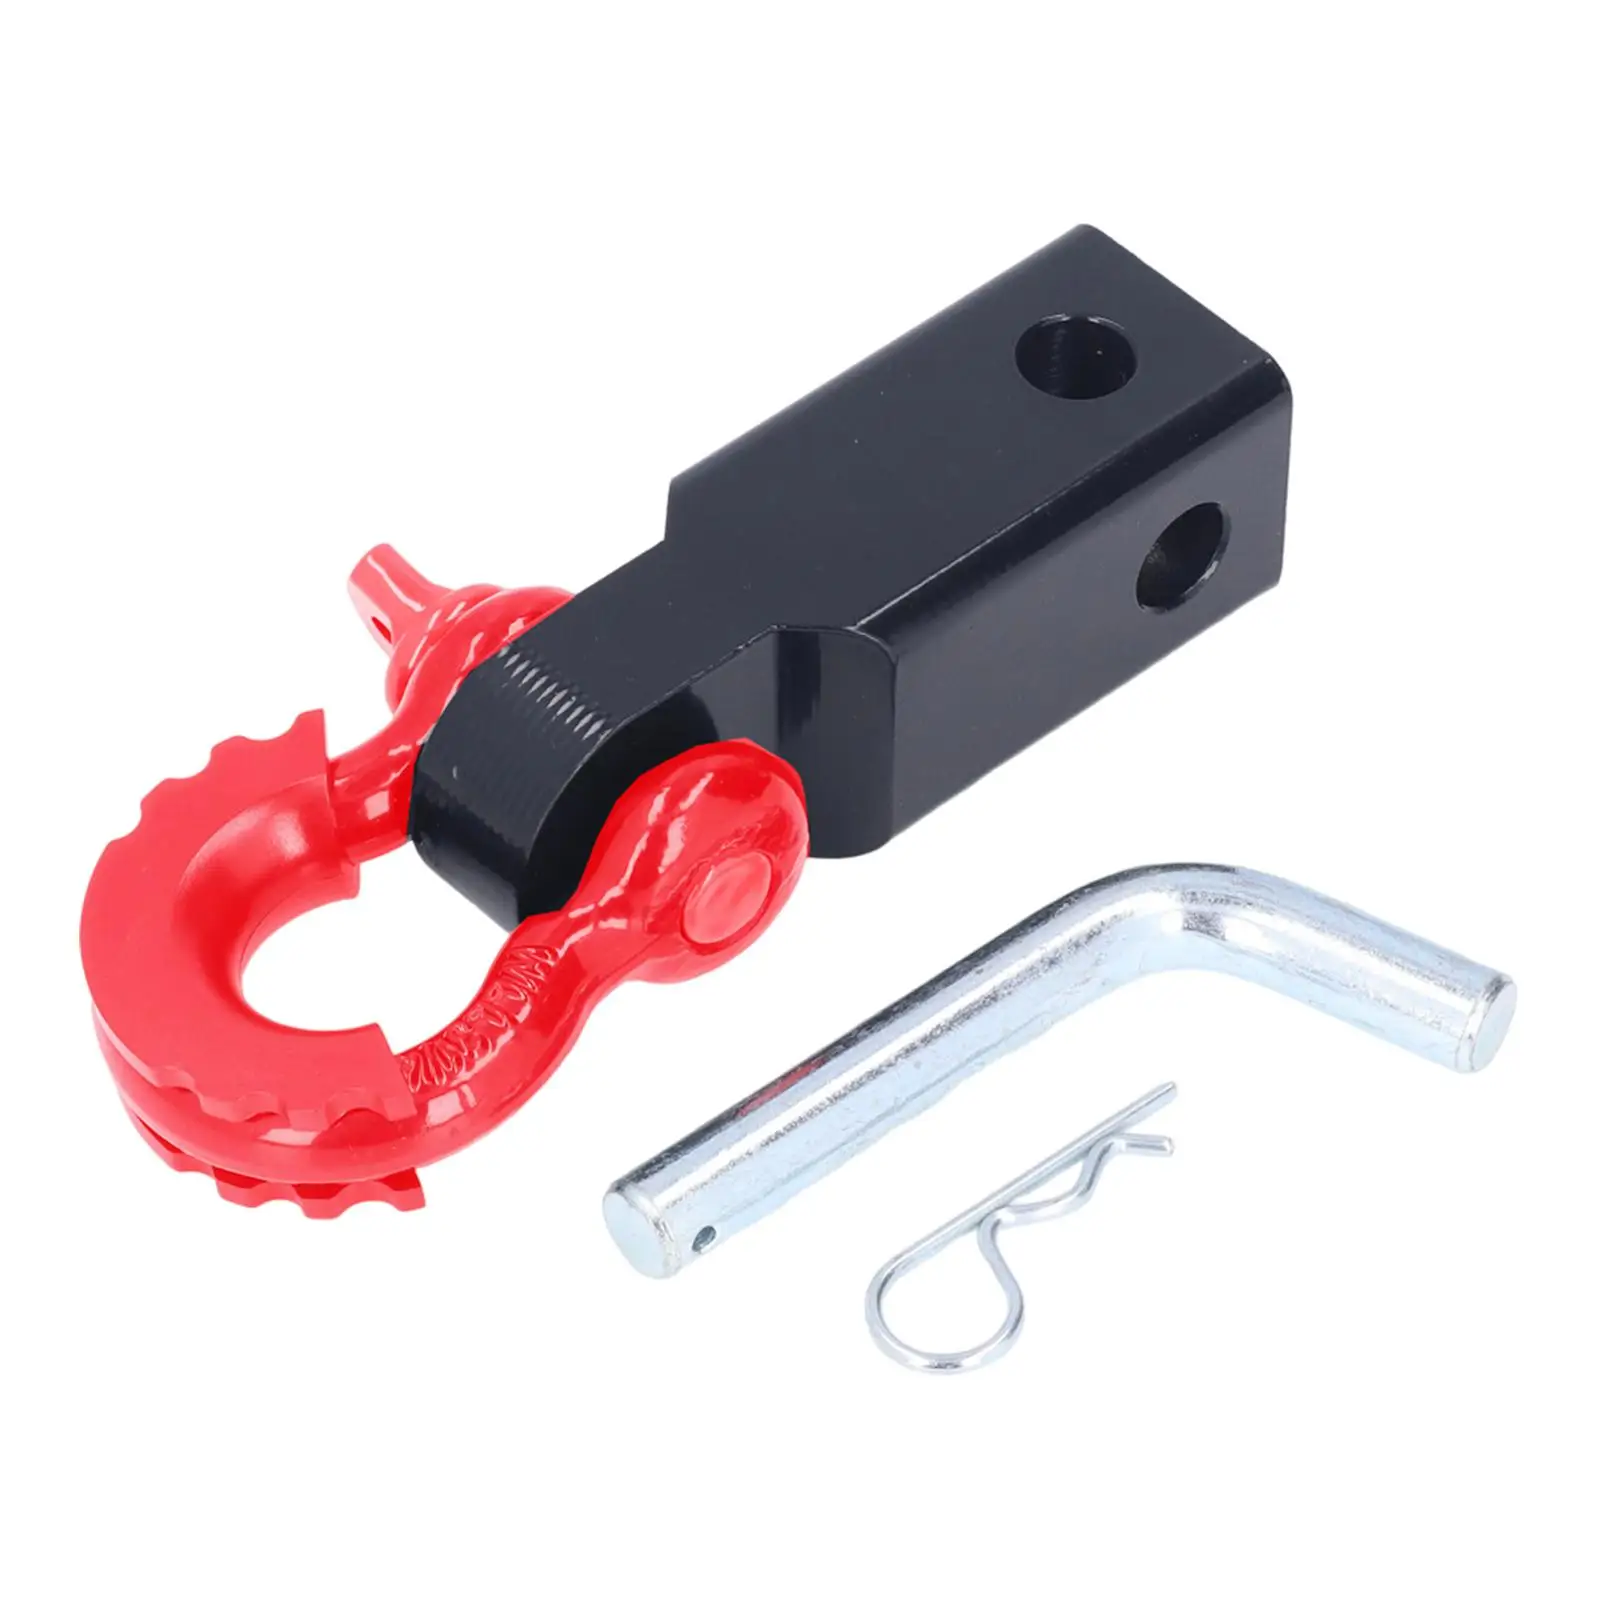 Shackle Hitch Receiver Attachments Professional Heavy Duty Easy to Use Spare Parts Towing Kits Connector for Car Trucks SUV